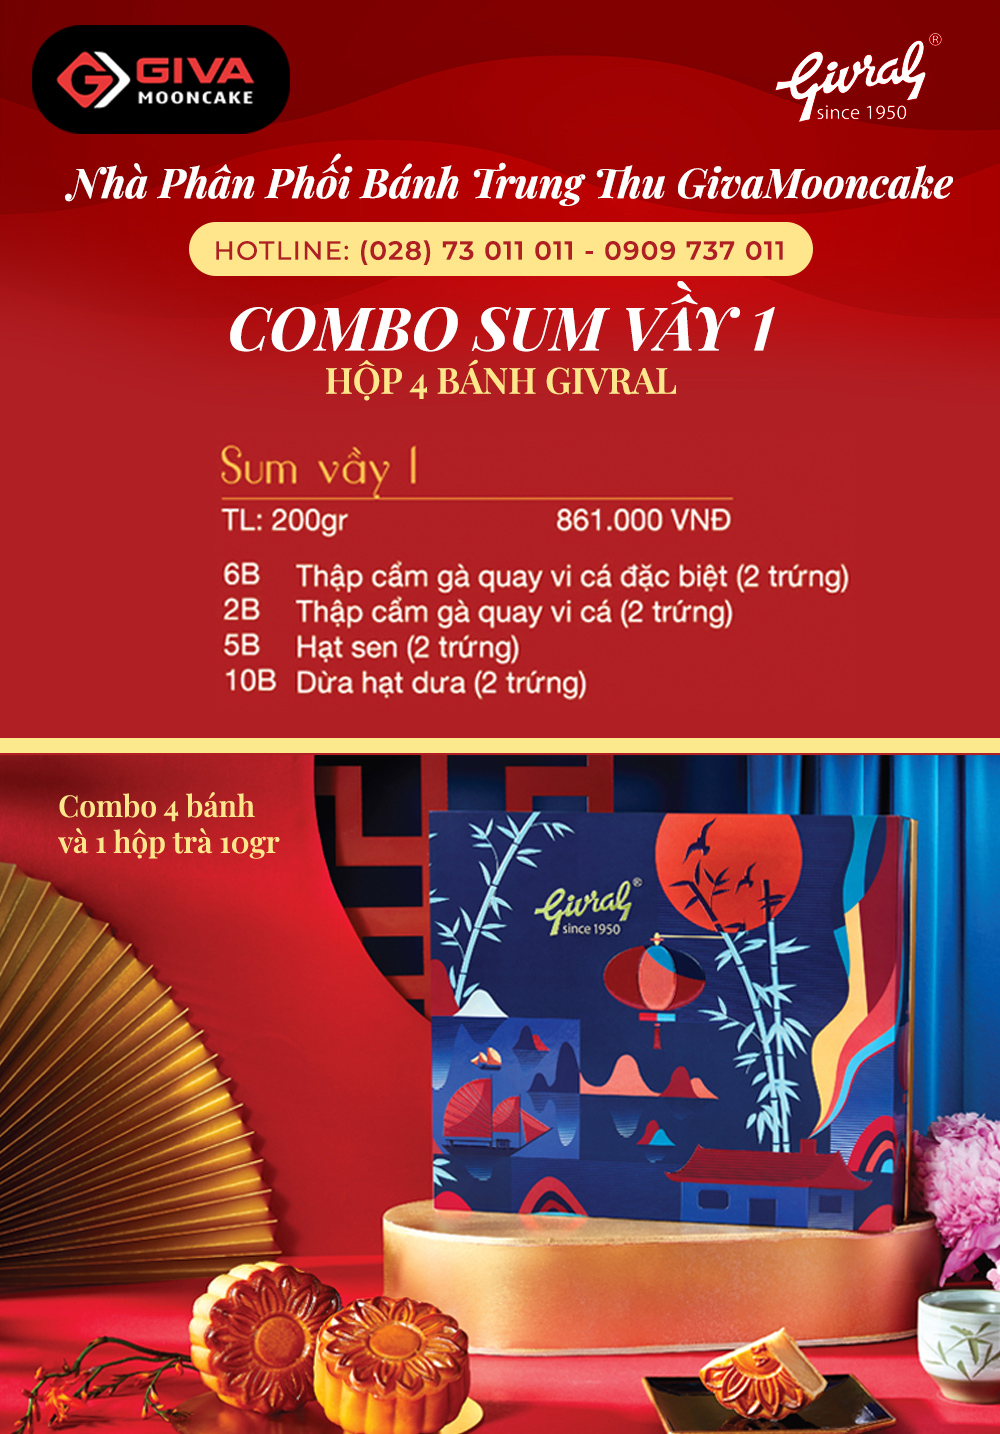 Combo Givral 4 bánh Sum Vầy 1